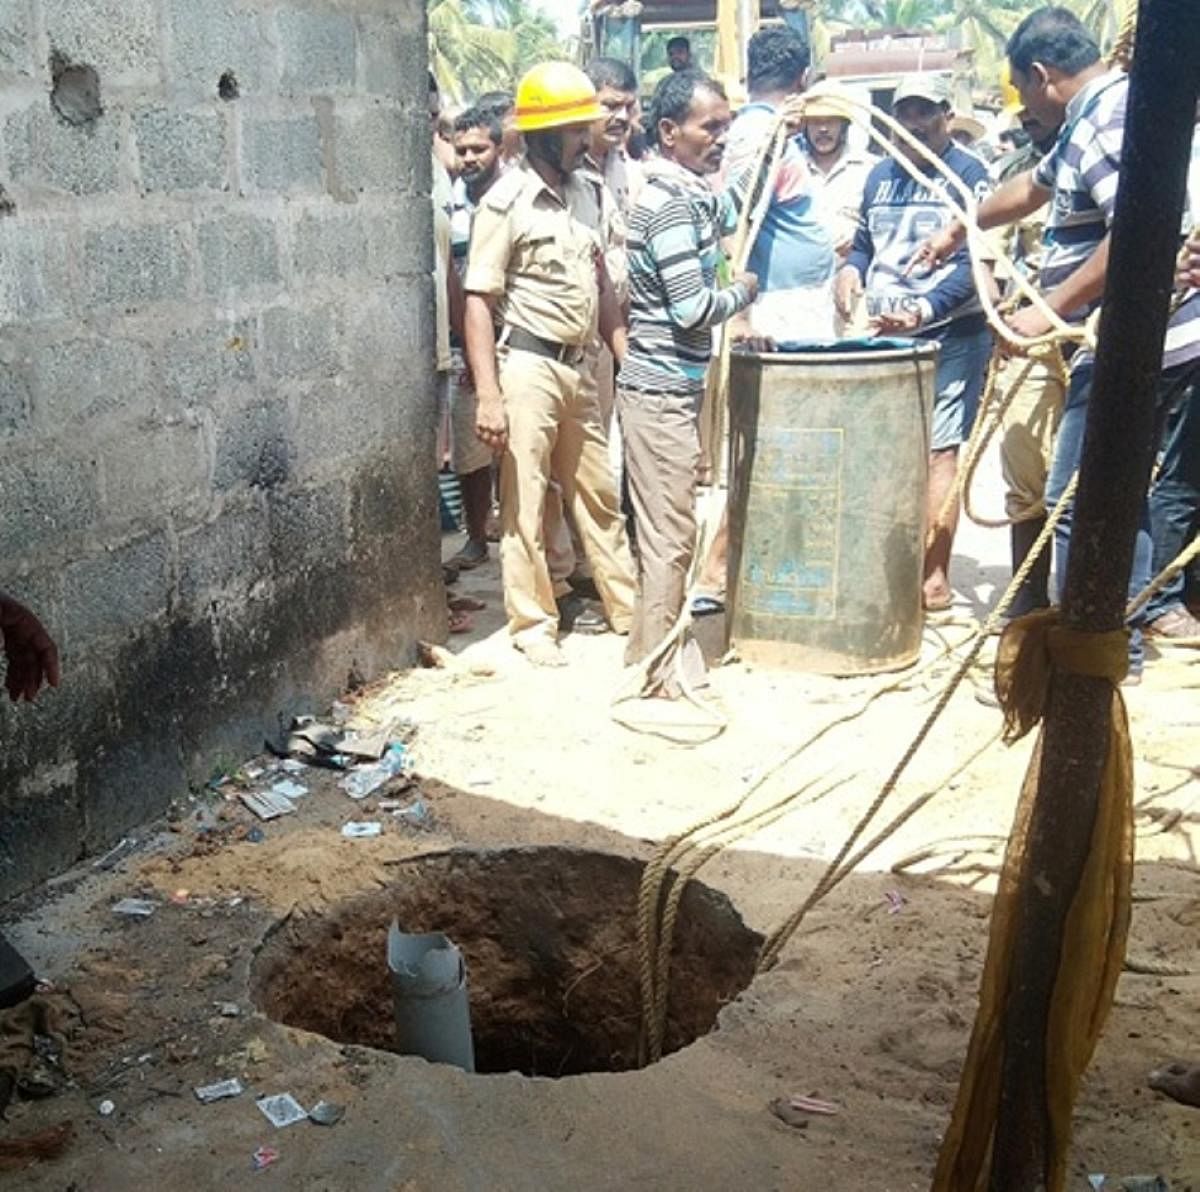 The pit into which Rohit had fallen.